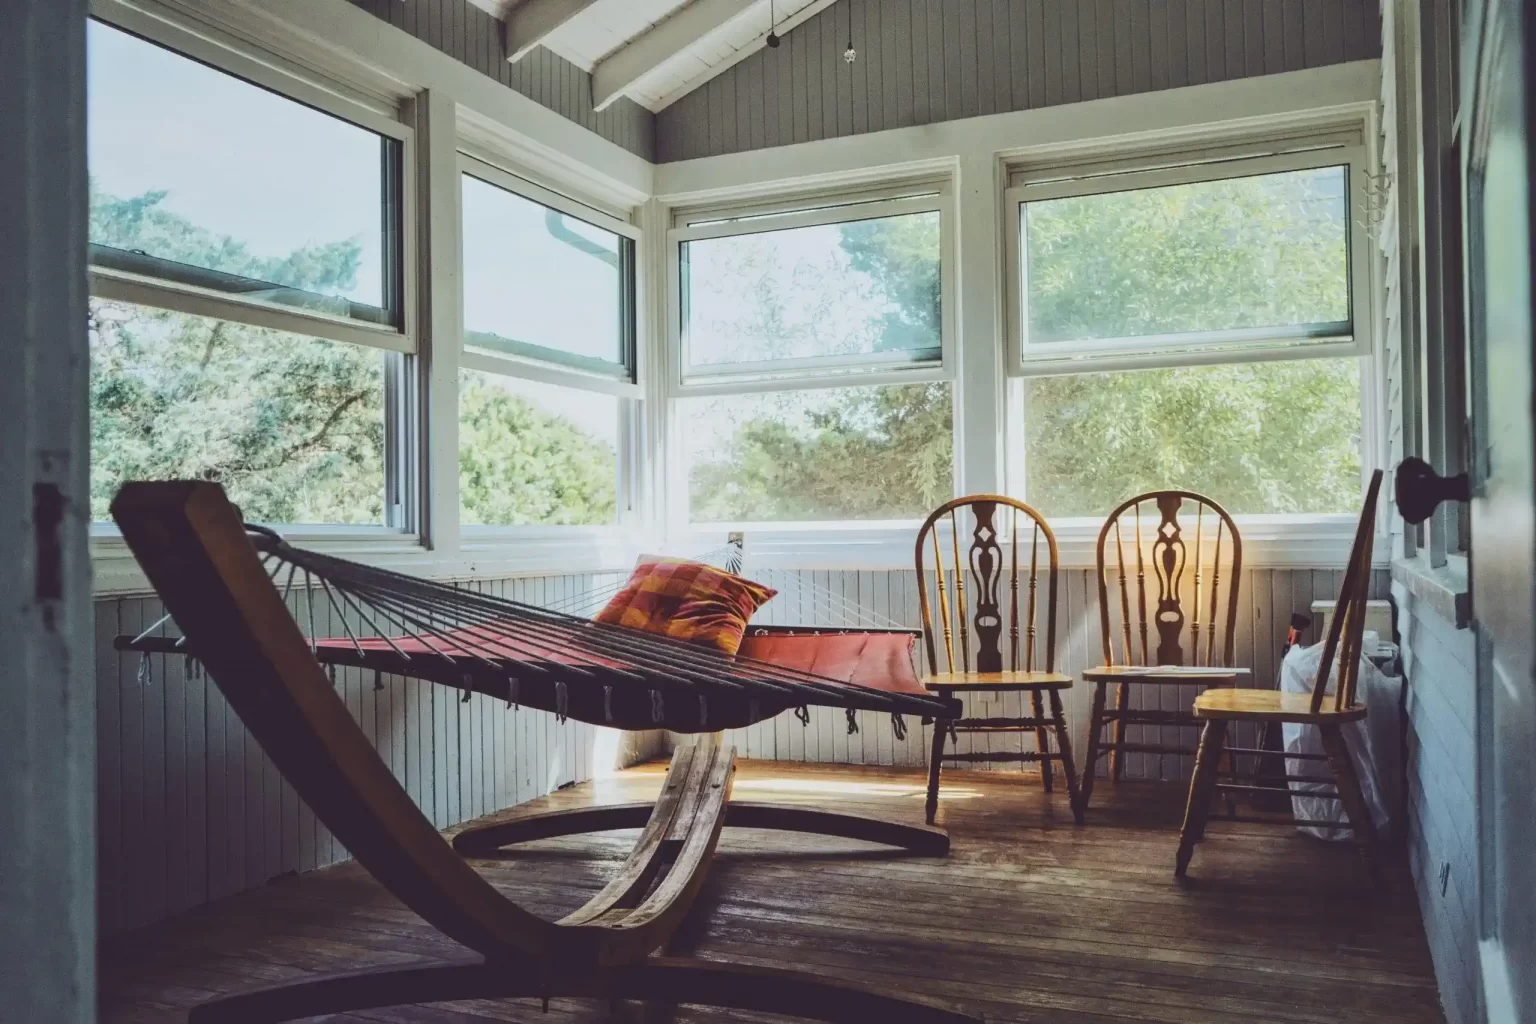 Hammock in cabin with nature view